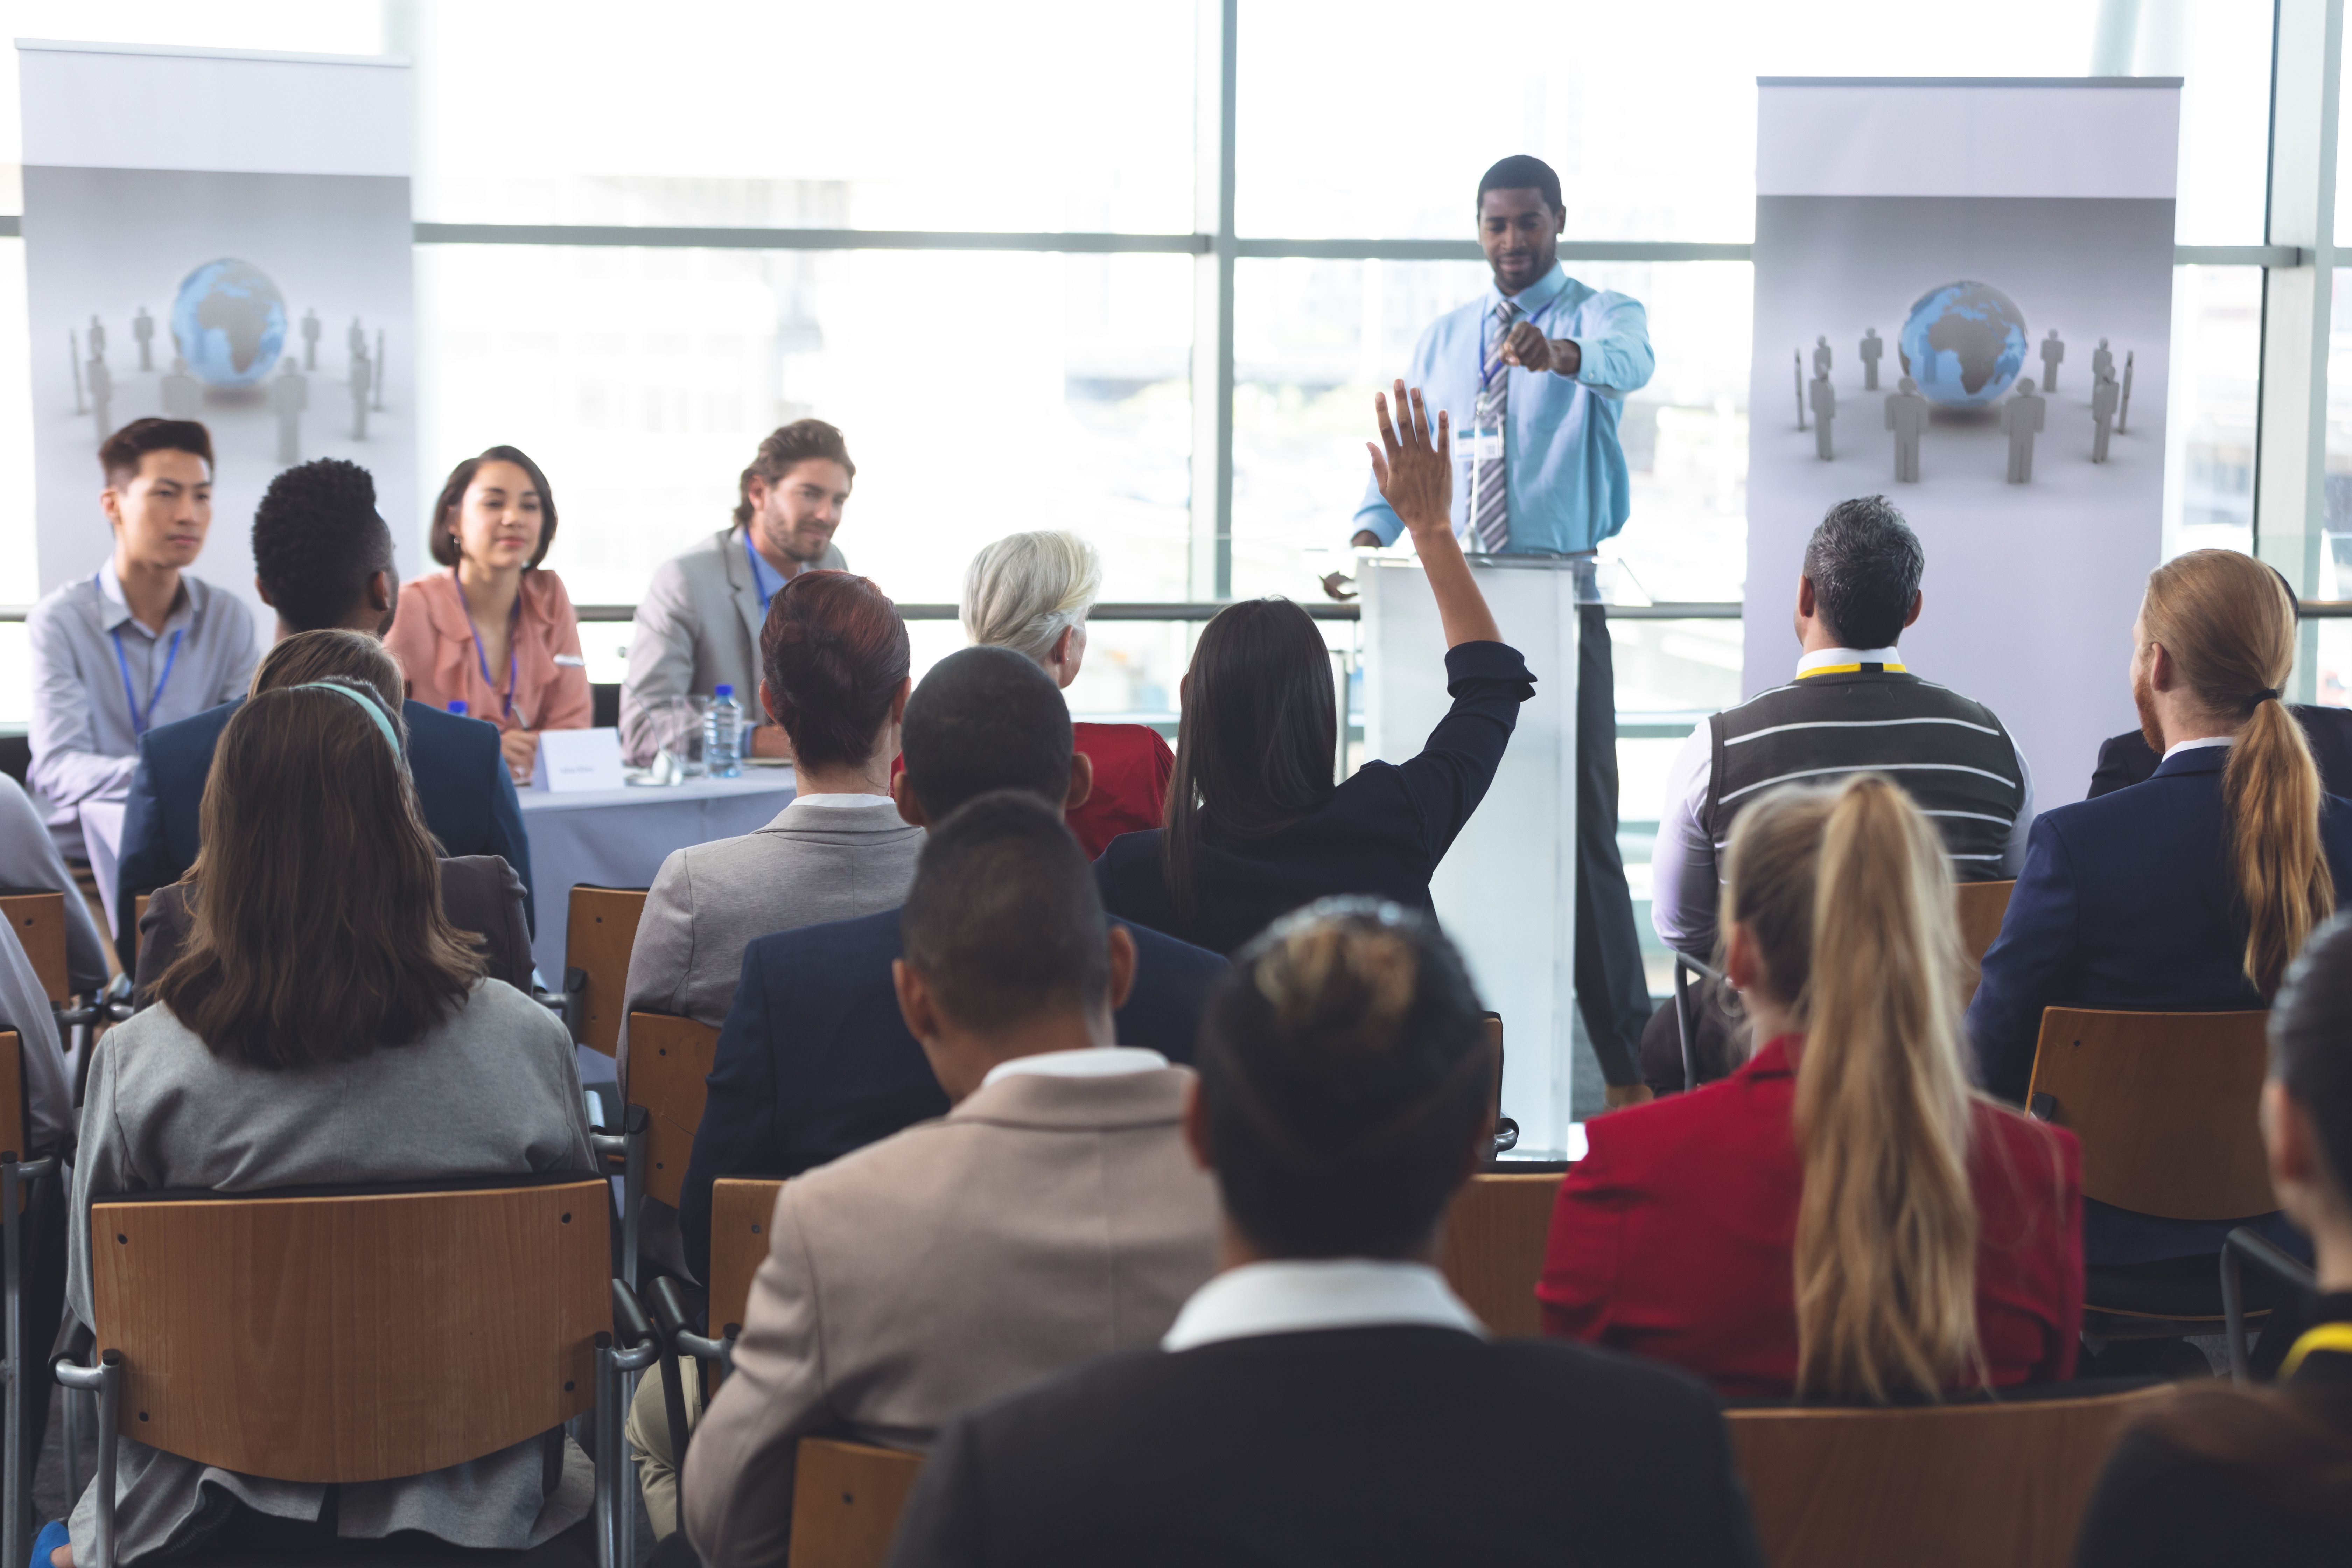 Diverse people at a learning event in which the speaker calls on someone raising their hand